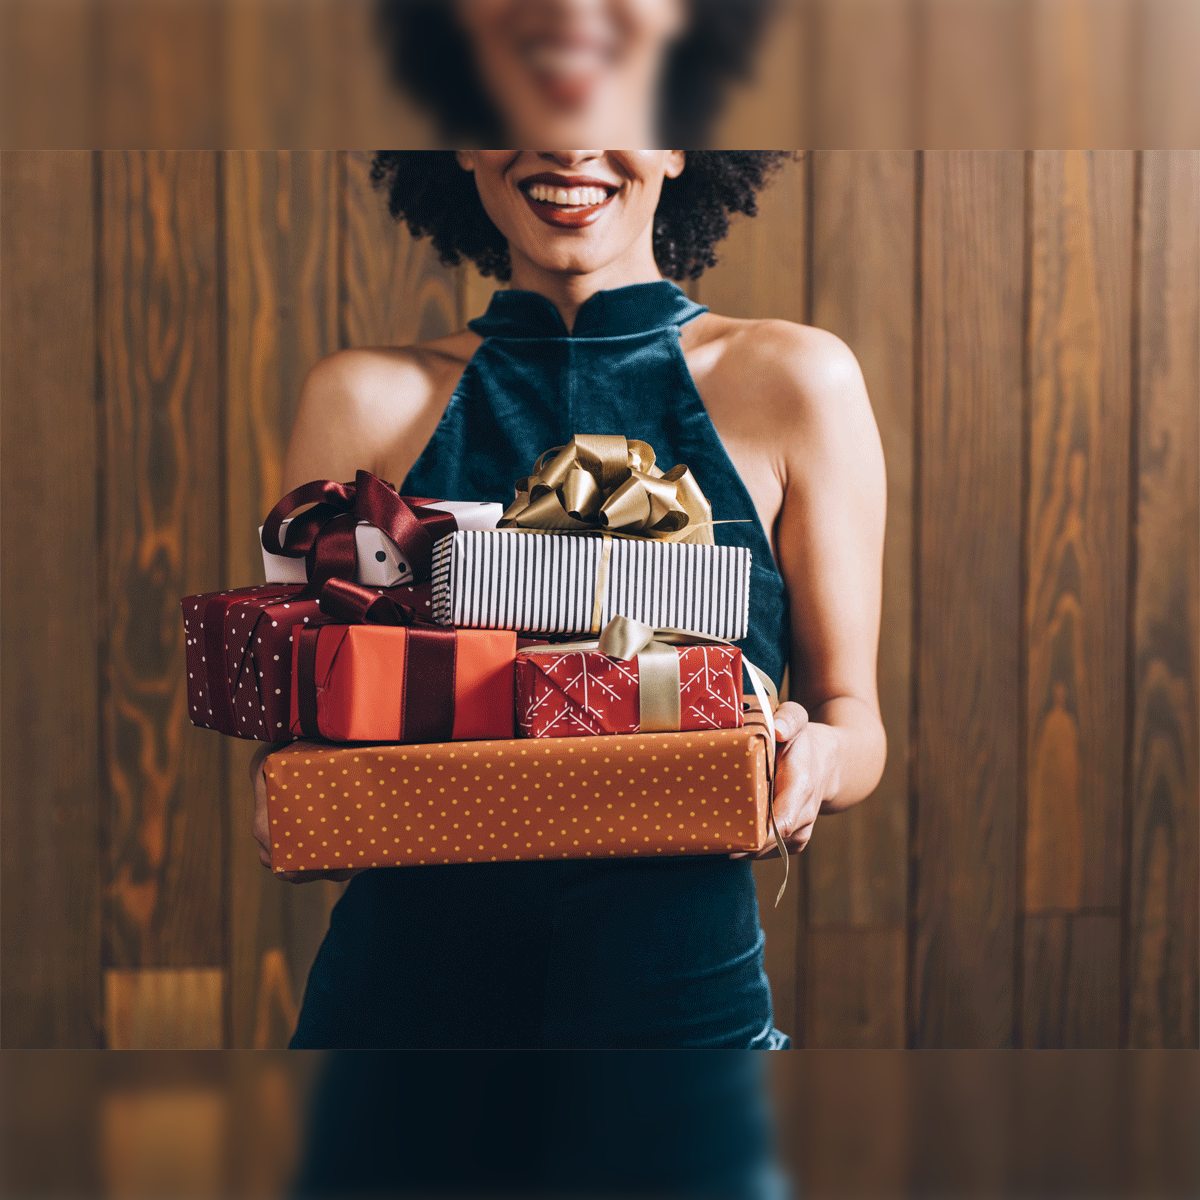 Stamp Duty on Gift Deed: Rates and Regulations